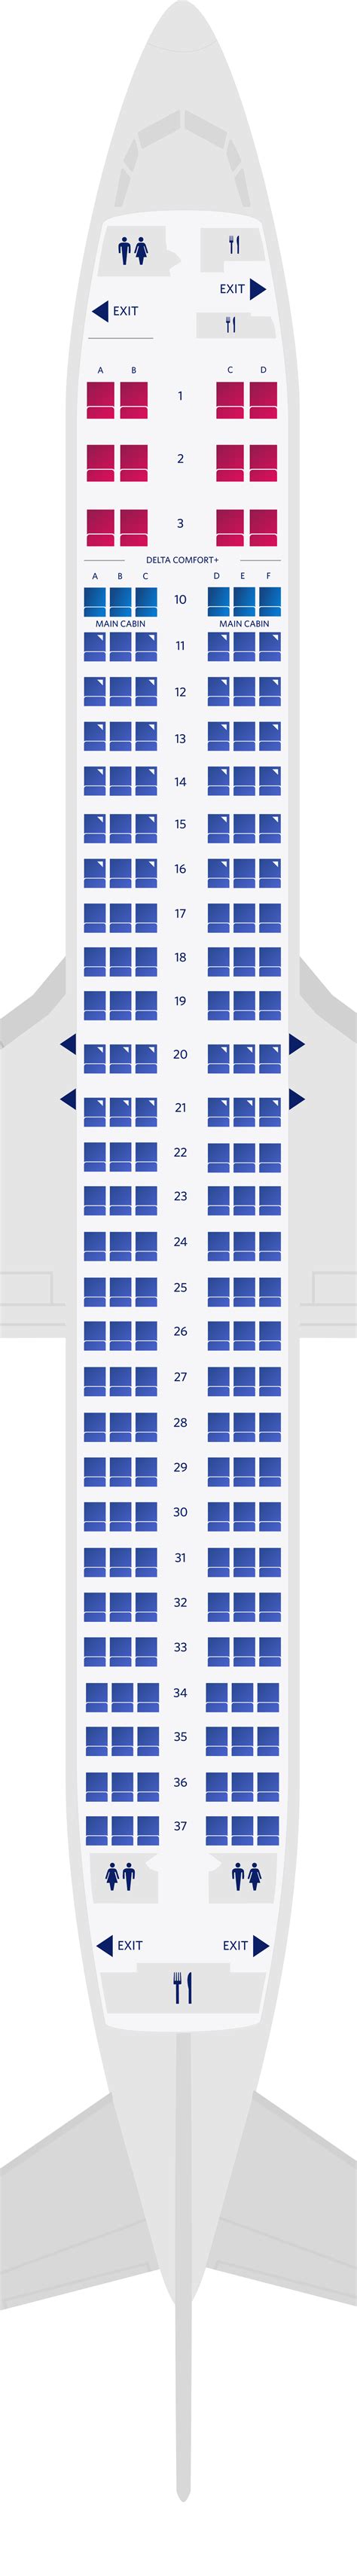  The seat layout from left to right for rows 1 and 8 is A, aisle, H. These seats come with a table on the right. The seat layout from left to right for rows 2, 4, 6, 9, 11, and 13 is C, aisle, E, G, aisle, K. These seats come with a table on the left. The seat layout from left to right for rows 3, 5, 7, 10, and 12 is A, aisle, D, F, aisle, H. . 